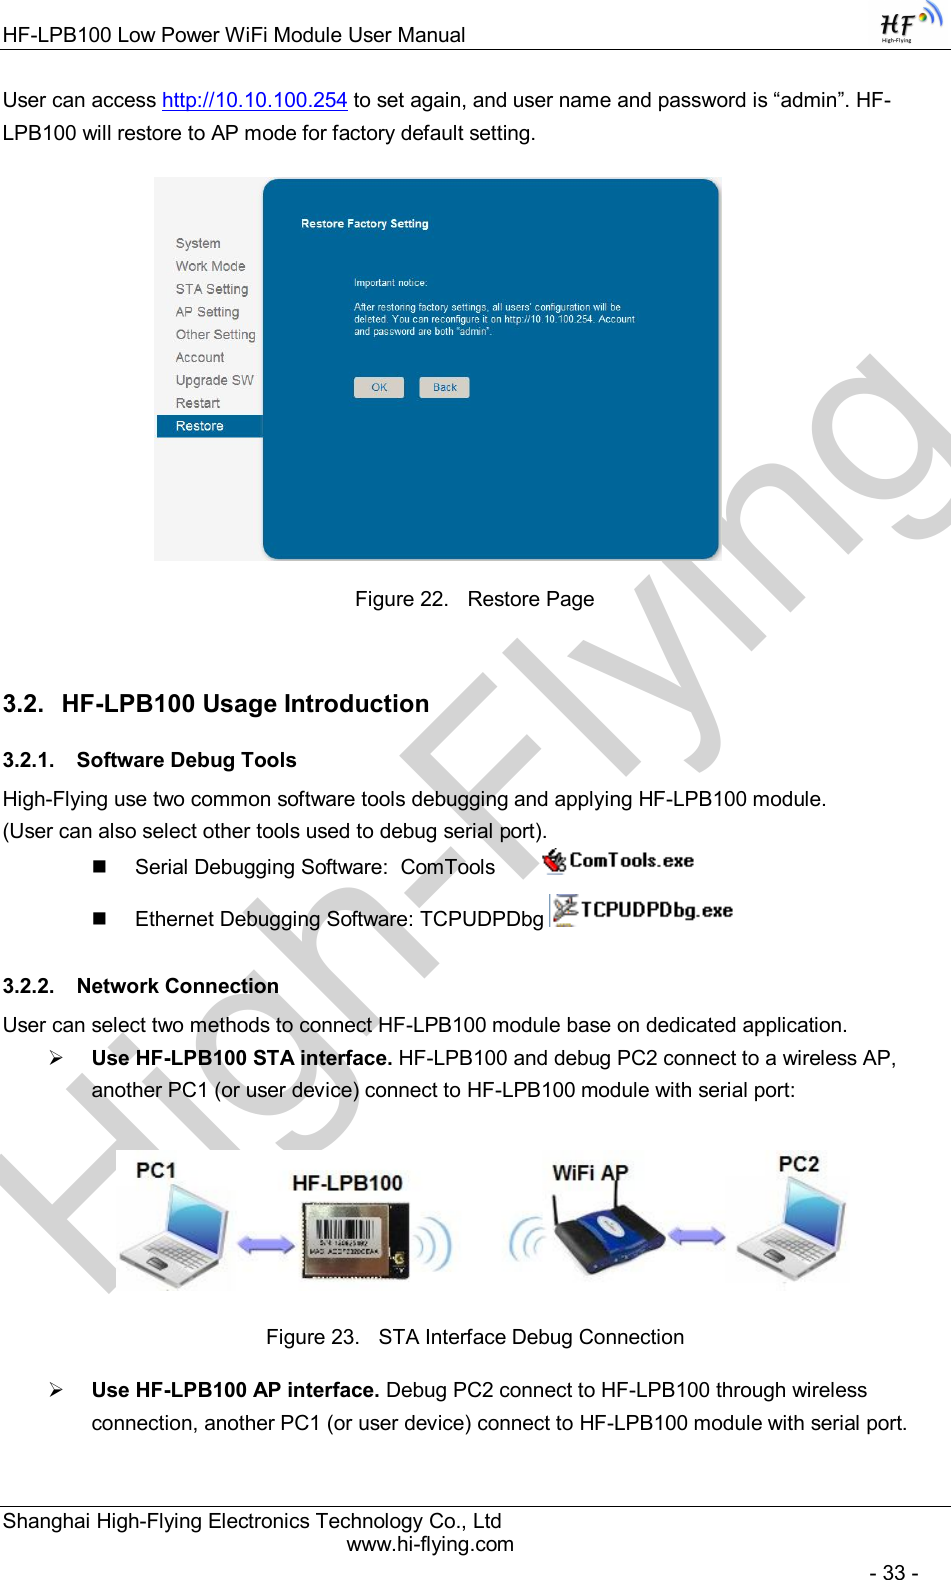 High-FlyingHF-LPB100 Low Power WiFi Module User Manual Shanghai High-Flying Electronics Technology Co., Ltd www.hi-flying.com   - 33 - User can access http://10.10.100.254 to set again, and user name and password is “admin”. HF-LPB100 will restore to AP mode for factory default setting.                      Figure 22.  Restore Page 3.2.  HF-LPB100 Usage Introduction 3.2.1.  Software Debug Tools High-Flying use two common software tools debugging and applying HF-LPB100 module.  (User can also select other tools used to debug serial port).   Serial Debugging Software:  ComTools            Ethernet Debugging Software: TCPUDPDbg   3.2.2.  Network Connection User can select two methods to connect HF-LPB100 module base on dedicated application.  Use HF-LPB100 STA interface. HF-LPB100 and debug PC2 connect to a wireless AP, another PC1 (or user device) connect to HF-LPB100 module with serial port:   Figure 23.  STA Interface Debug Connection  Use HF-LPB100 AP interface. Debug PC2 connect to HF-LPB100 through wireless connection, another PC1 (or user device) connect to HF-LPB100 module with serial port. 